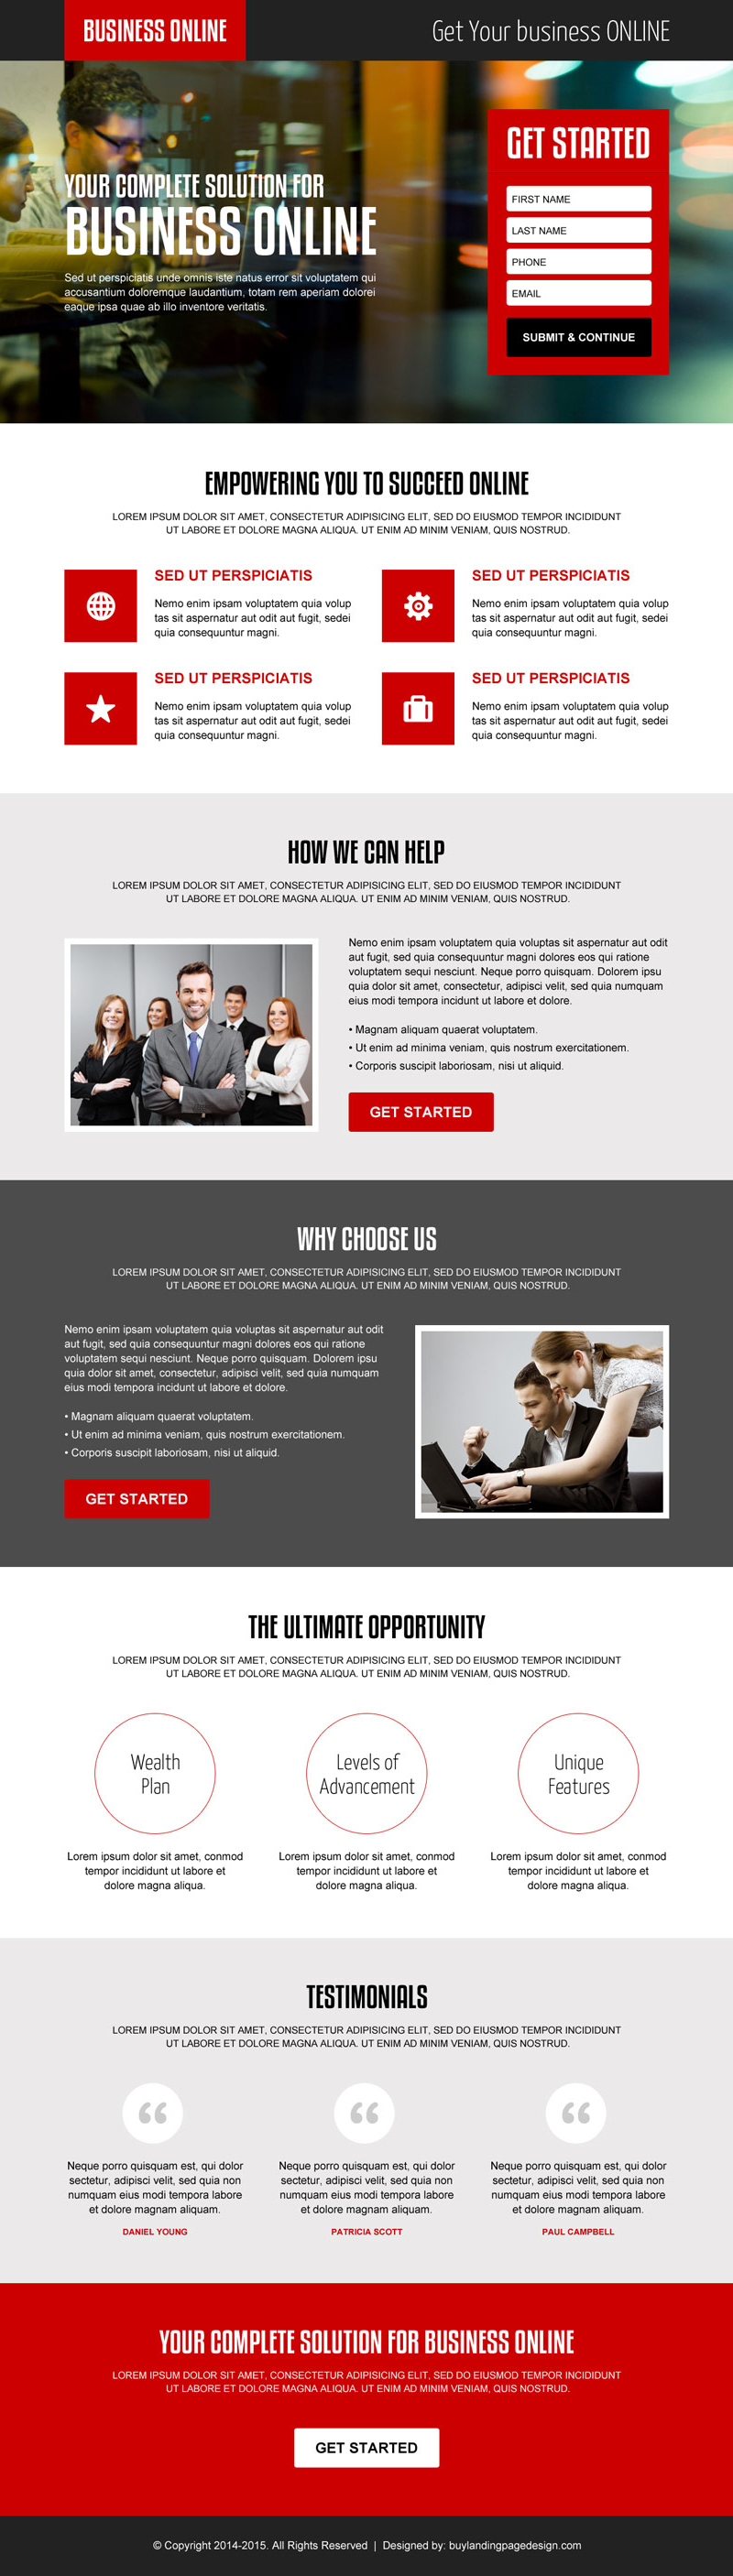 online-business-leads-conversion-landing-page-design-to-boost-your-business-with-leads-and-sales-040